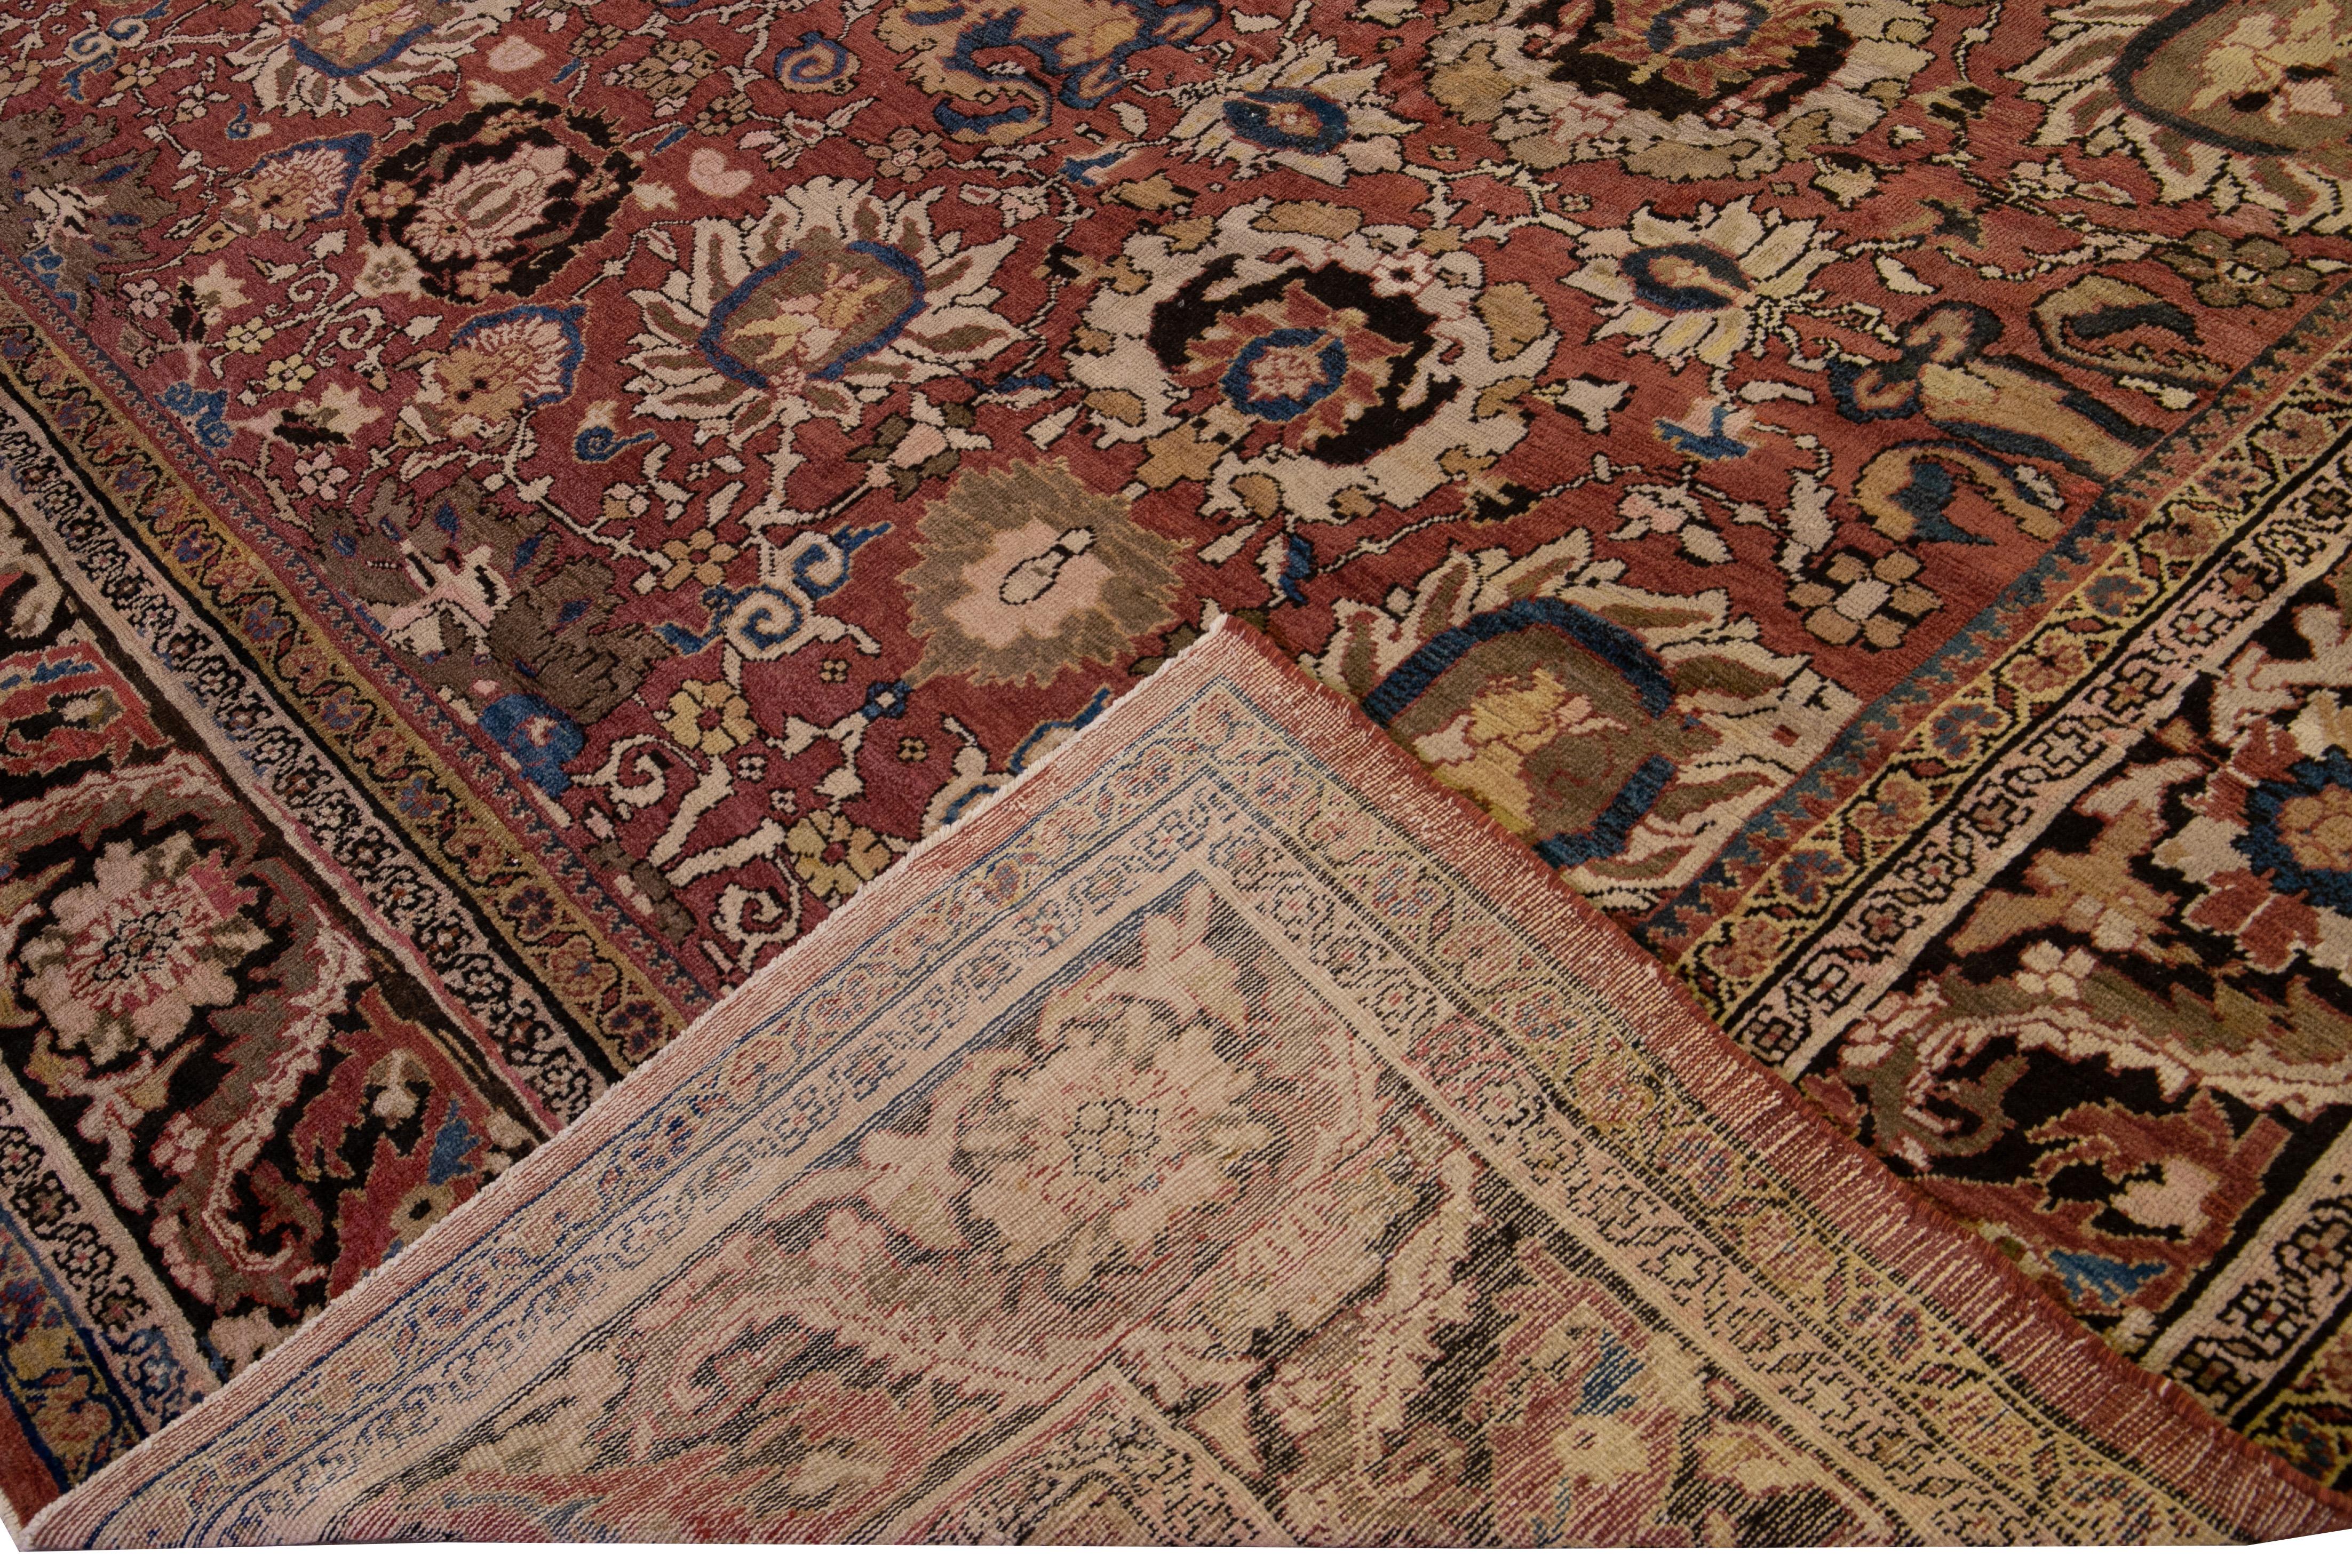 Beautiful Sultanabad hand-knotted wool rug with a red field. This antique piece has a multicolor accent in a gorgeous all-over floral pattern design.

This rug measures: 13'10